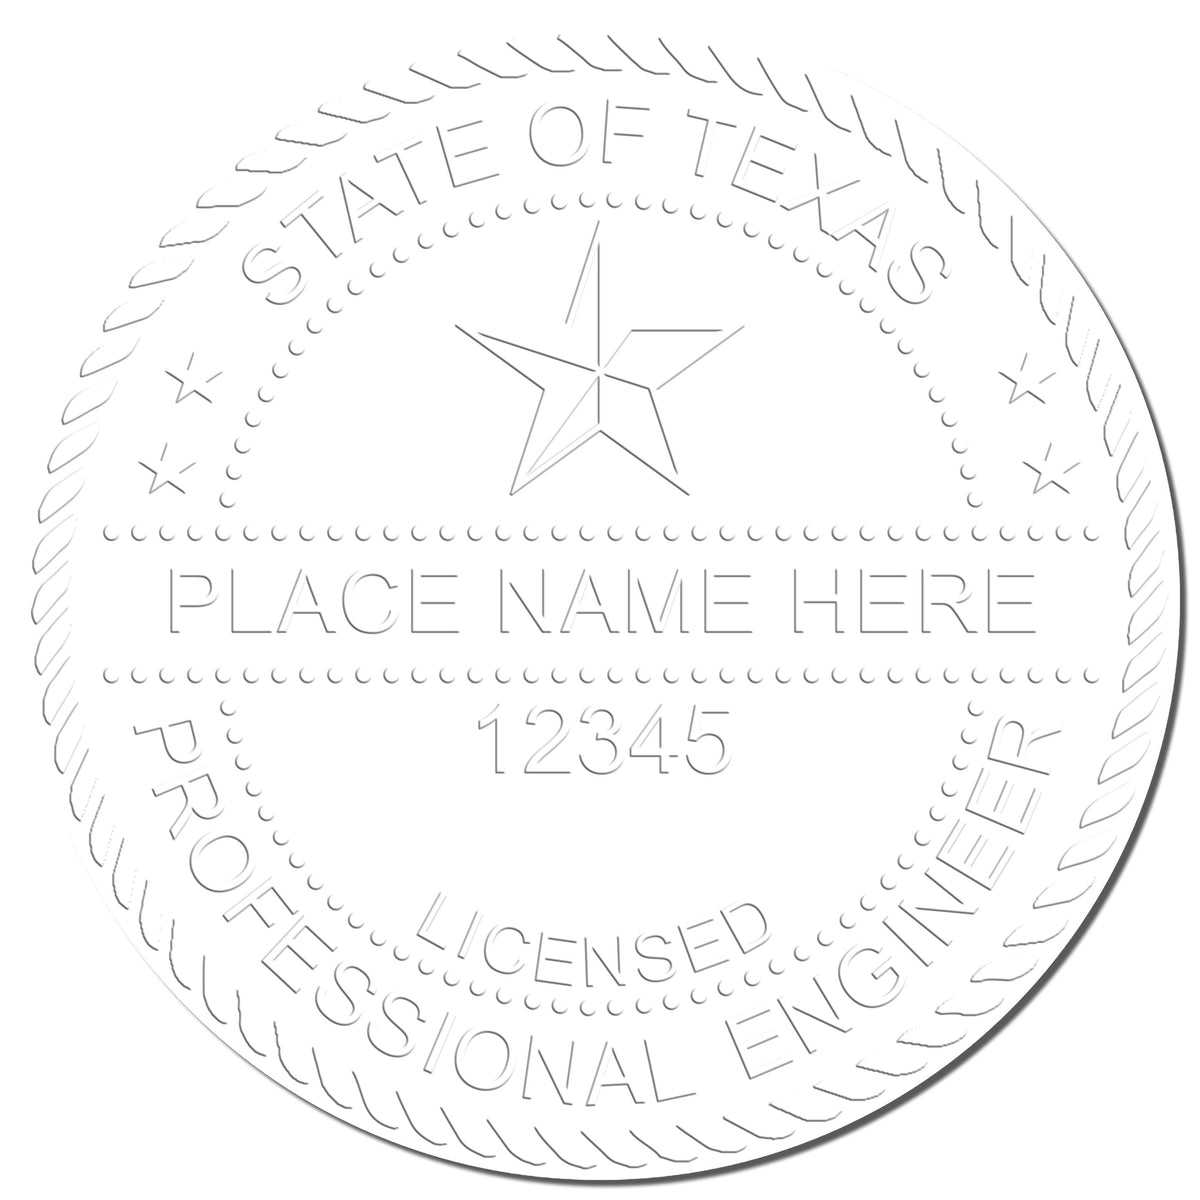 This paper is stamped with a sample imprint of the Heavy Duty Cast Iron Texas Engineer Seal Embosser, signifying its quality and reliability.